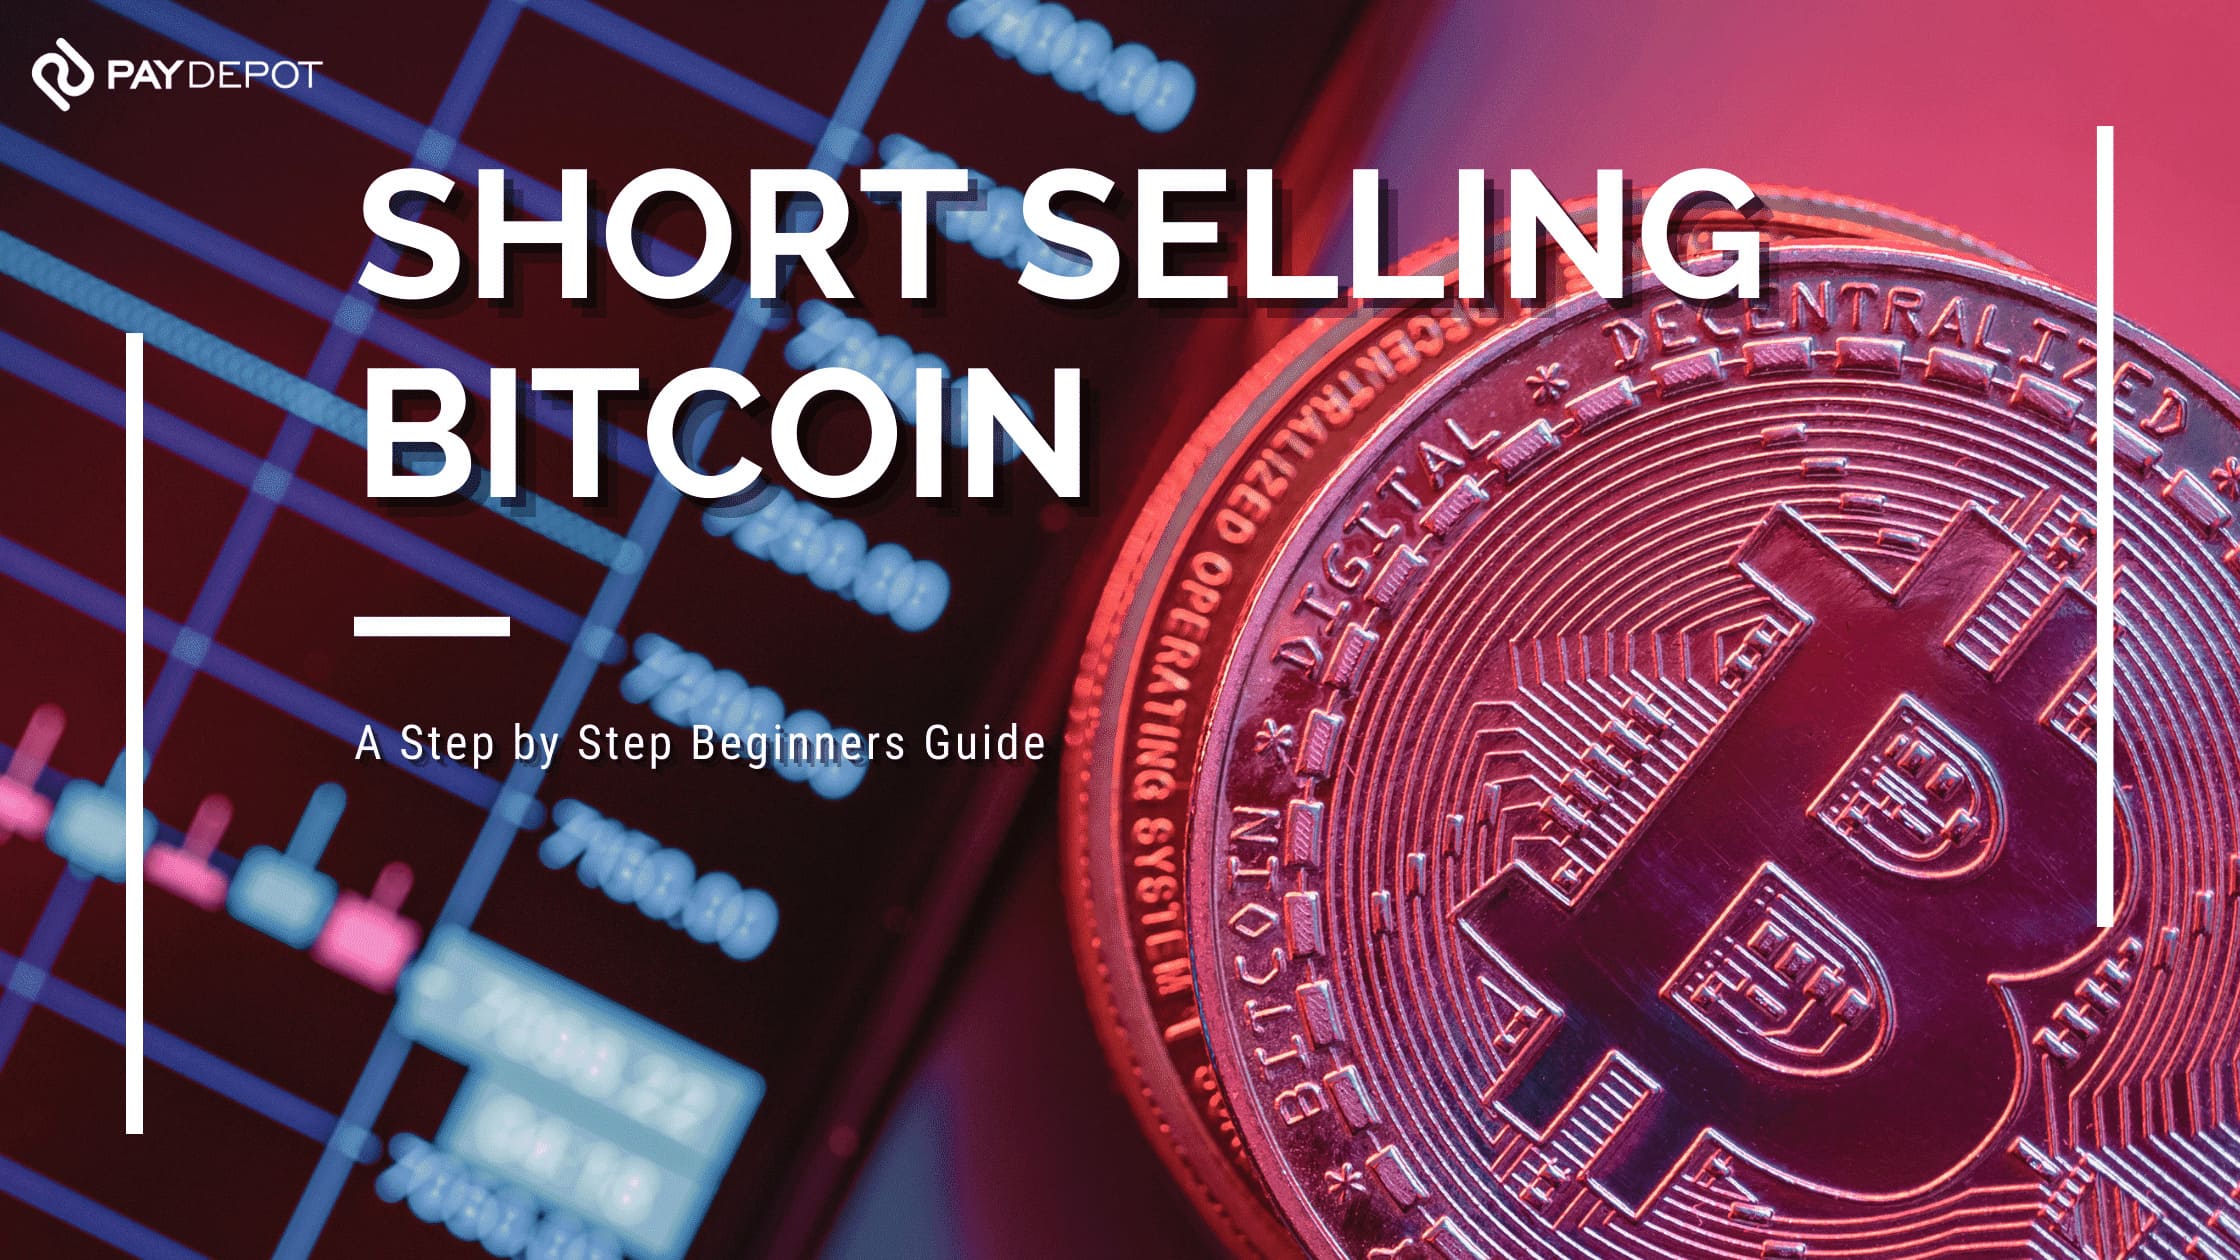 Short Selling Bitcoin - a Step by Step Beginners Guide